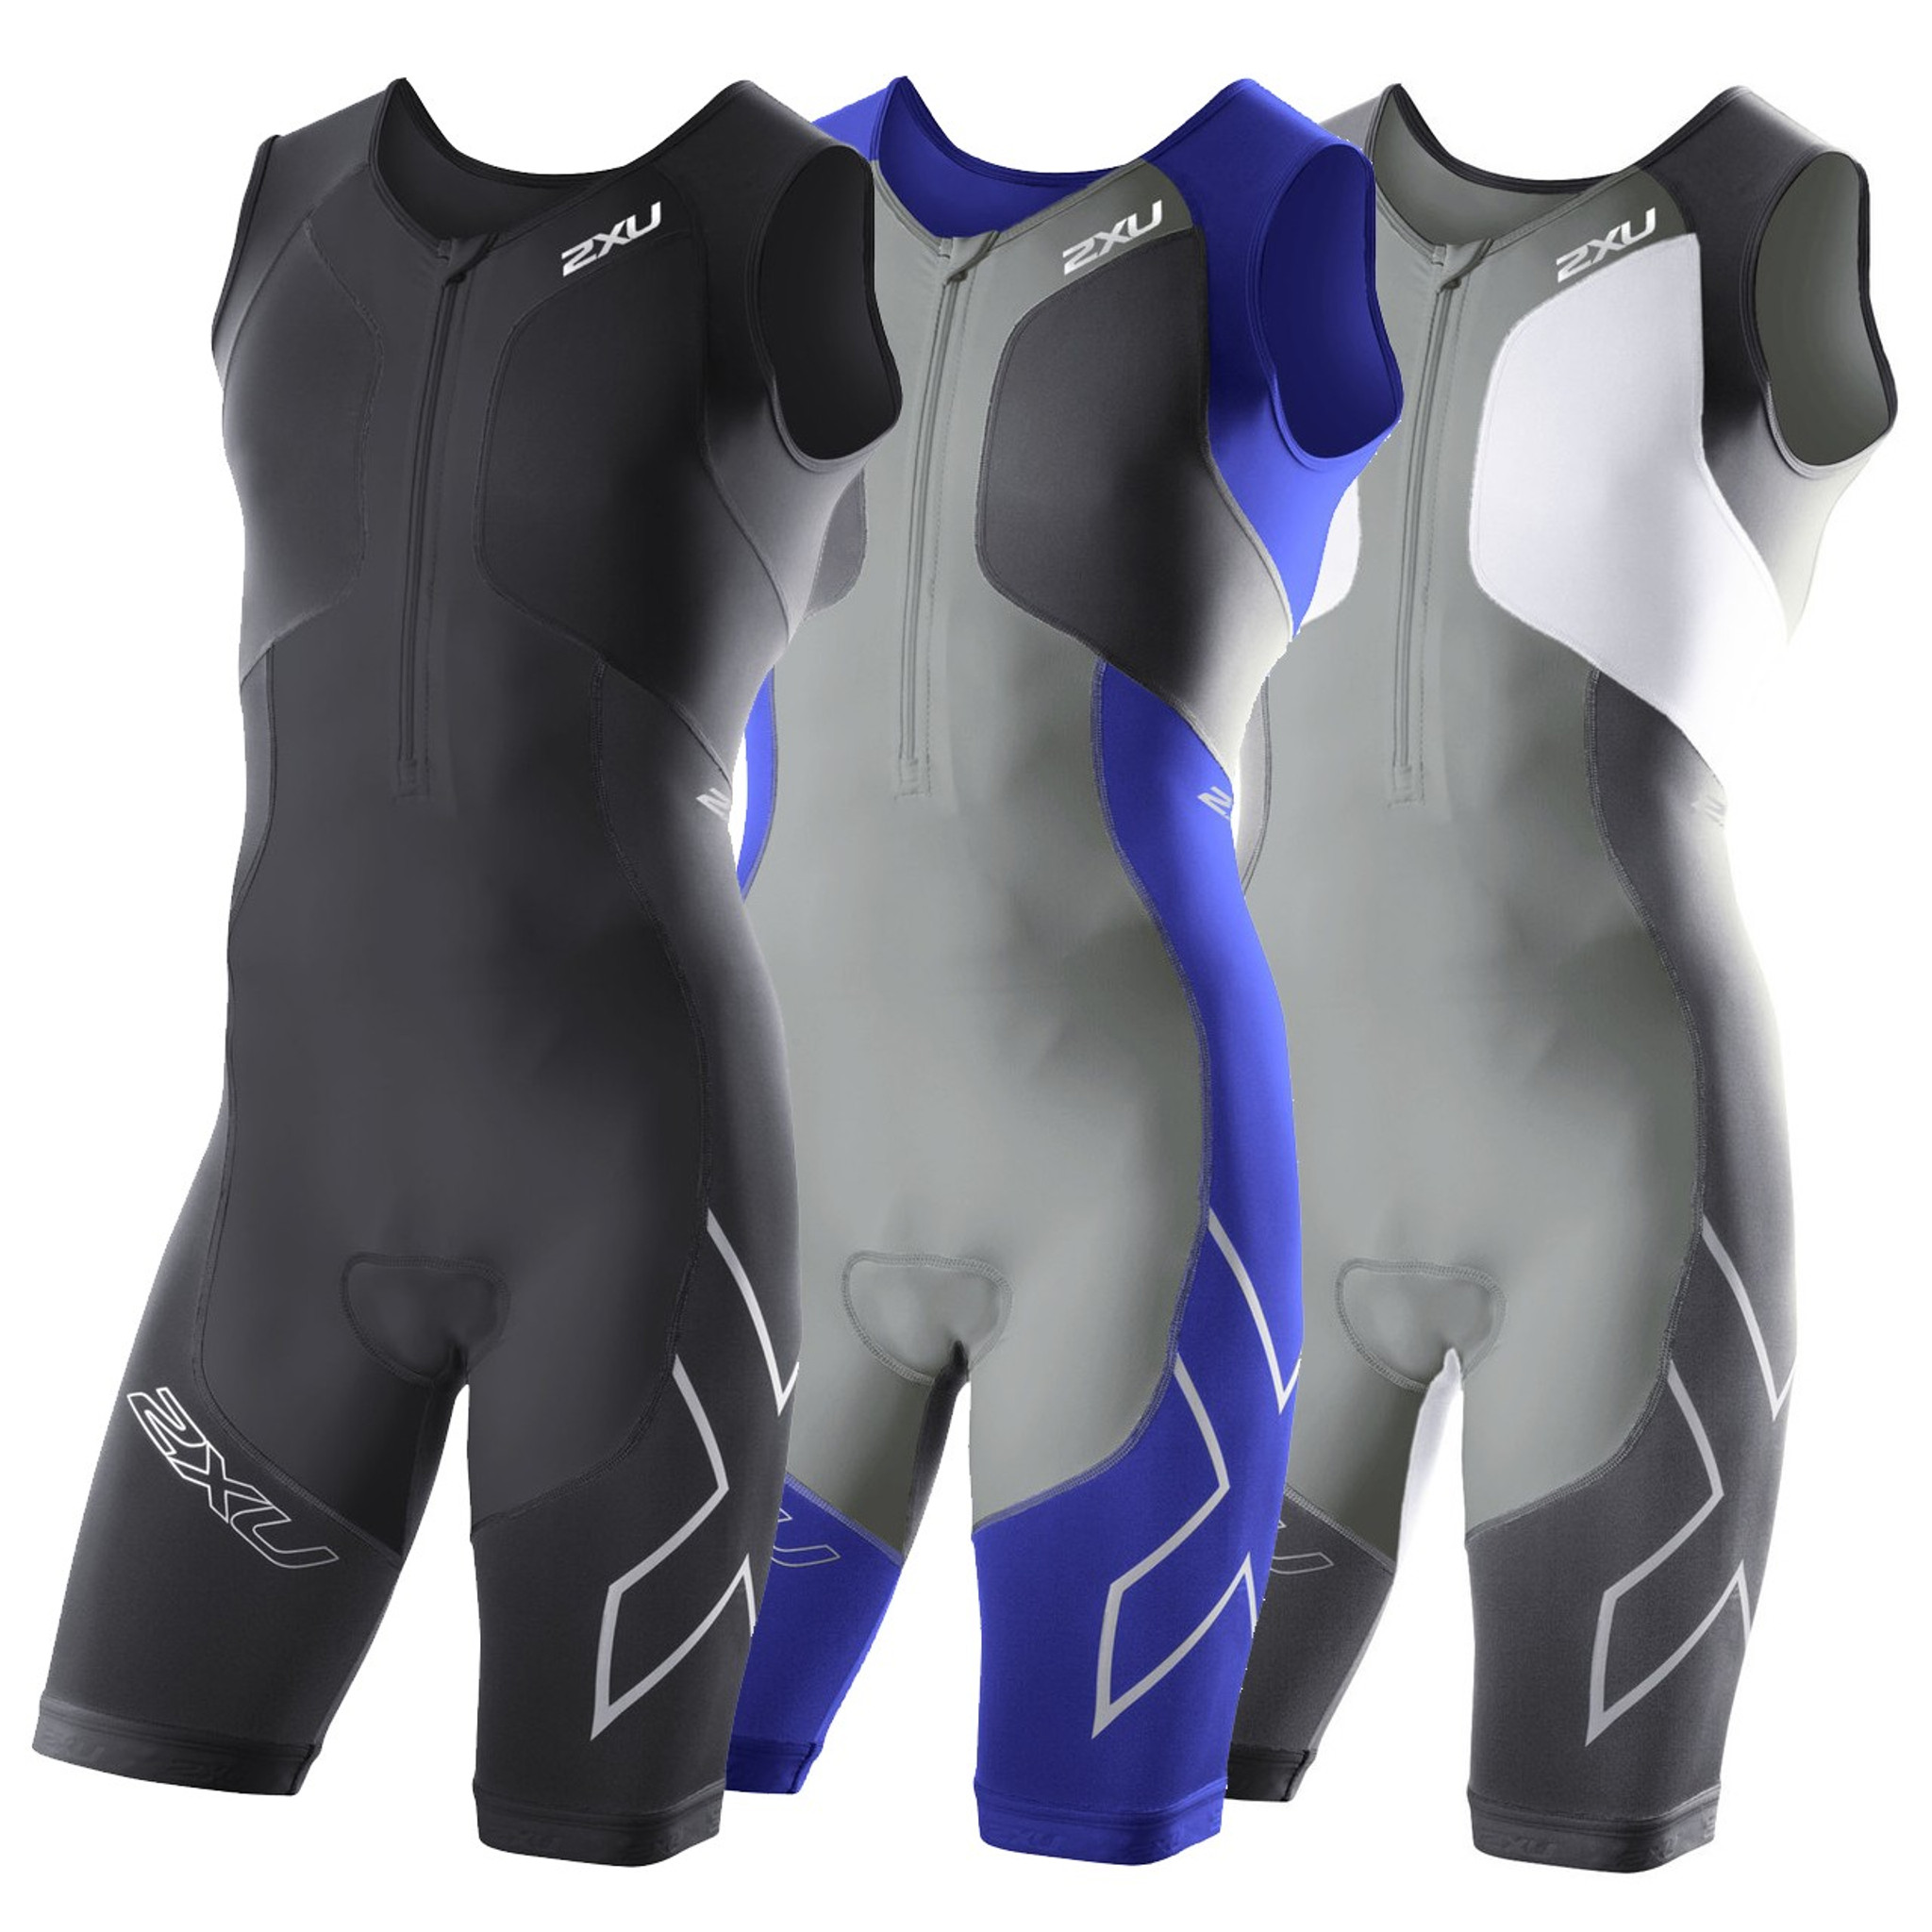 Lave forurening Auckland 2XU 2014 Men's G:2 Compression Trisuit - Black, Charcoal/White, Nautic  Blue/Charcoal - MyTriathlon - 2XU's Second Generation of the Iconic Compression  Trisuit